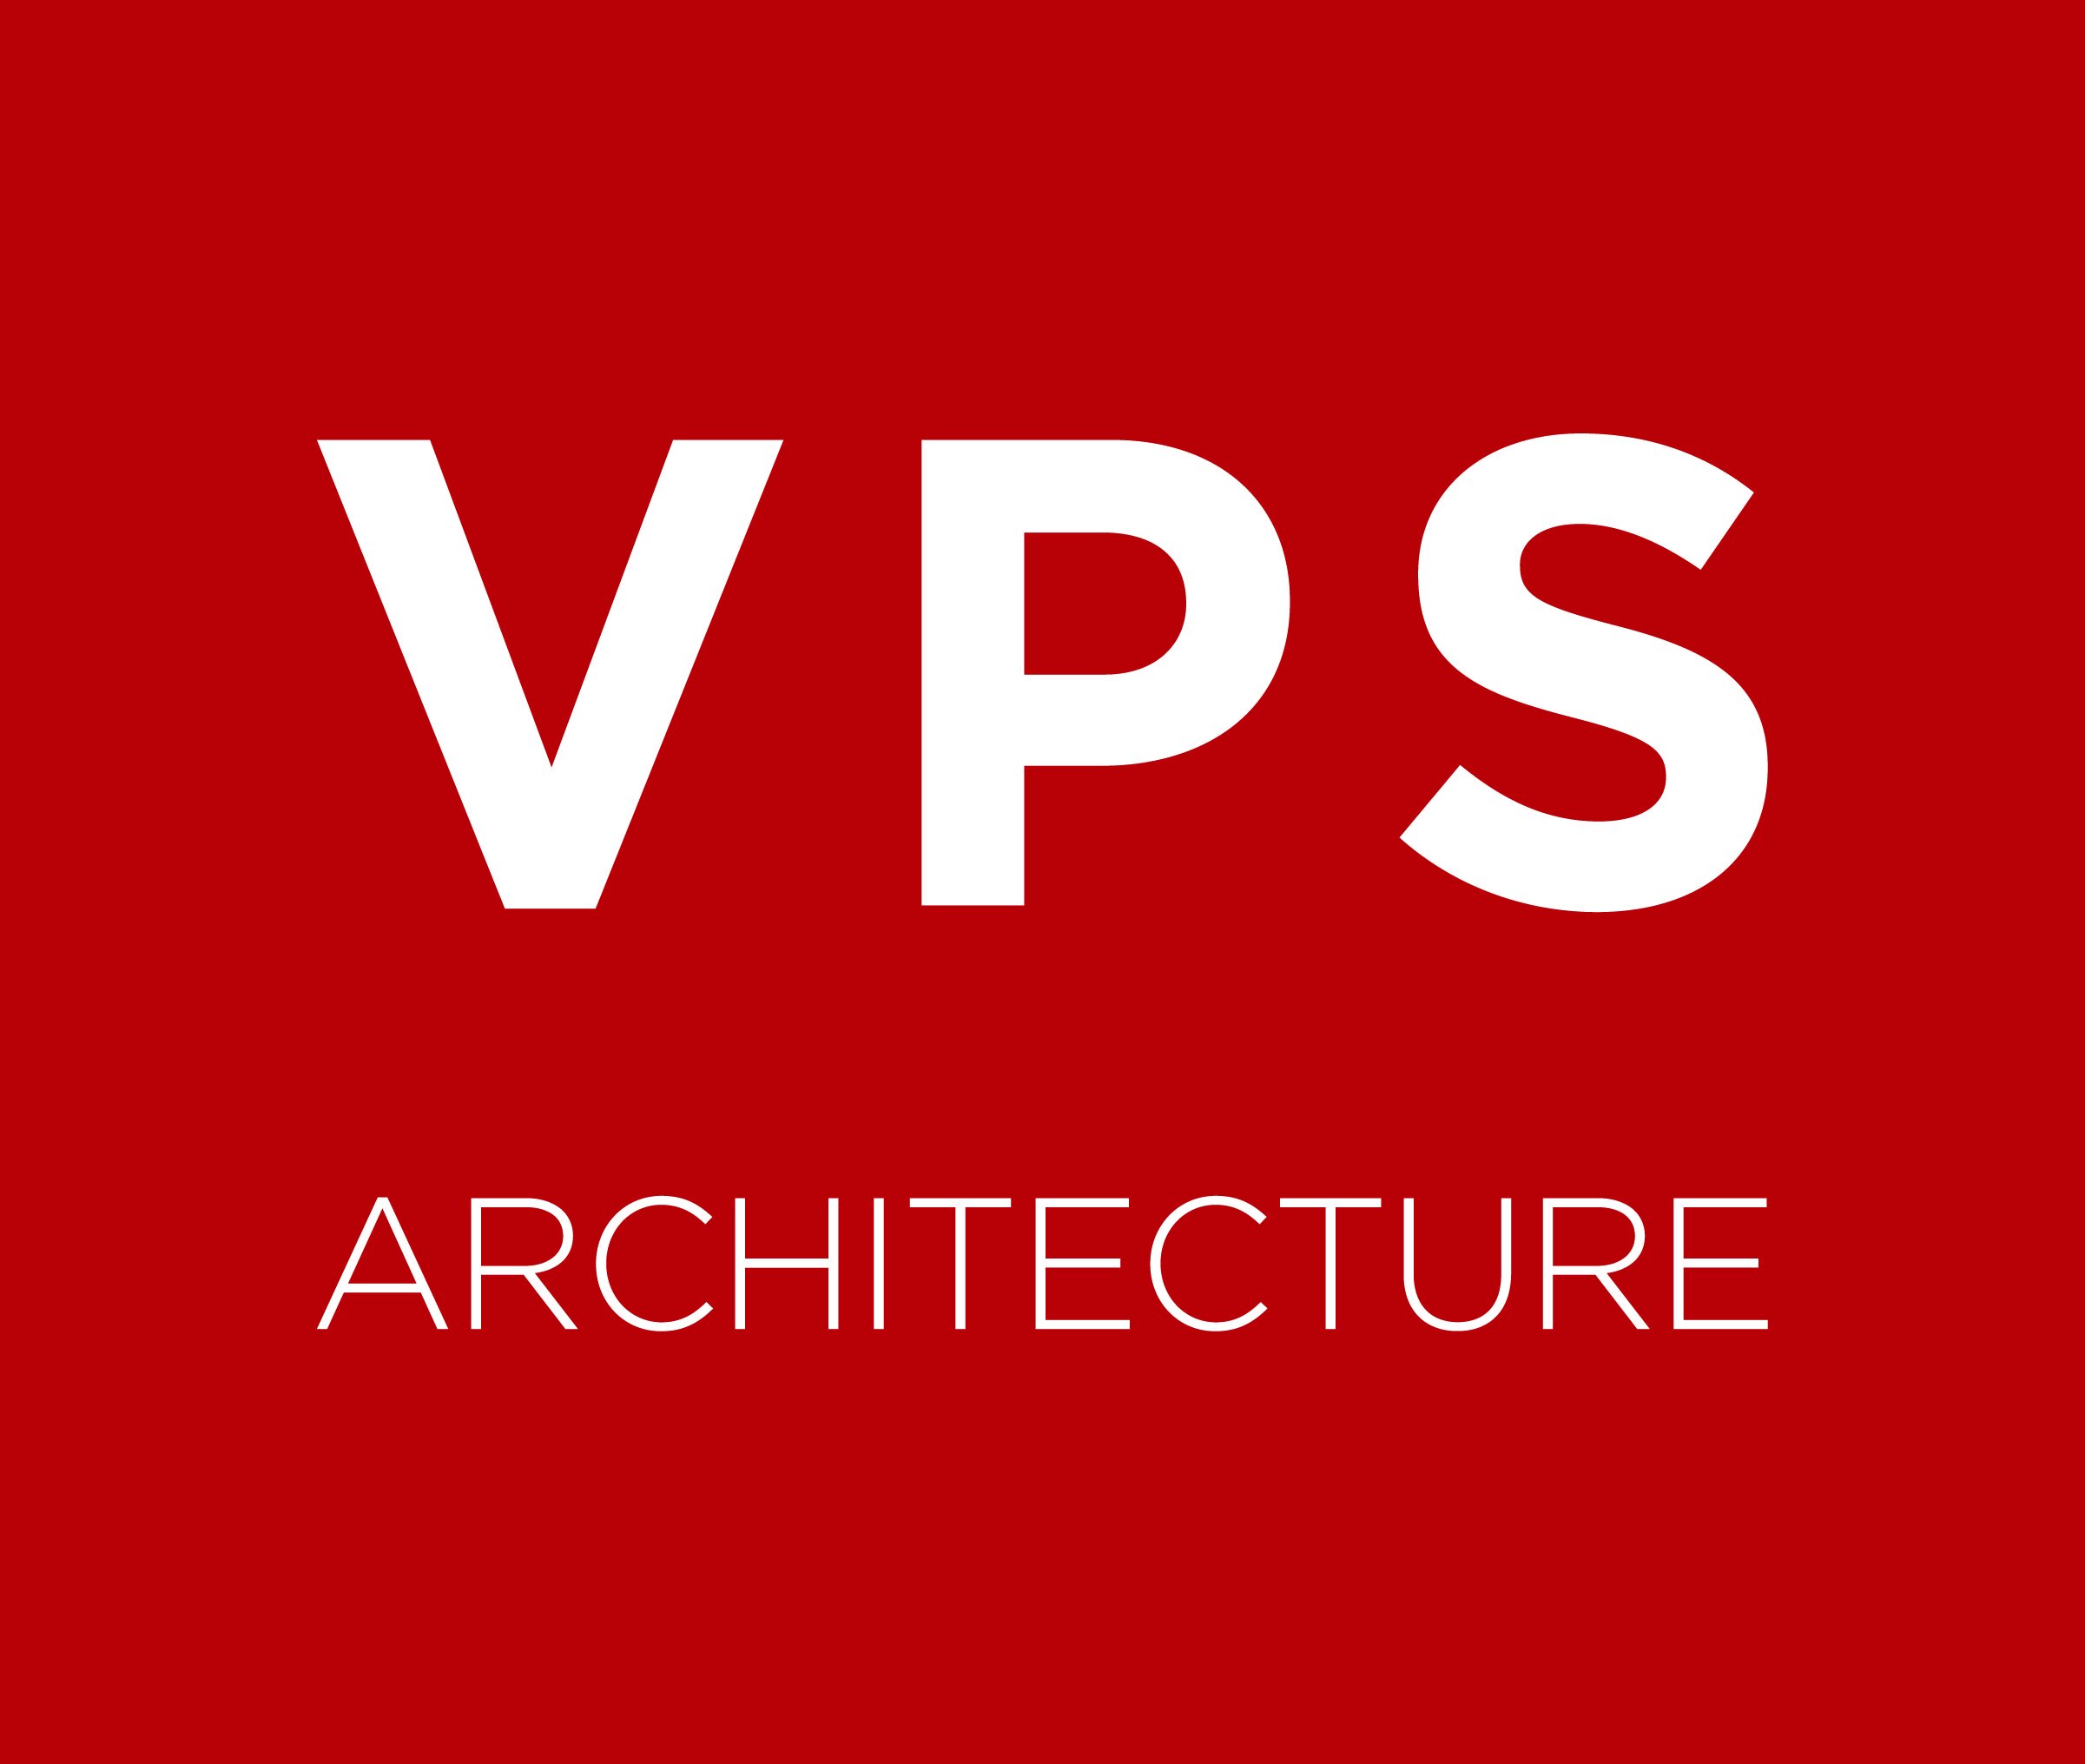 VPS_Stacked RED BACKGROUND.jpg